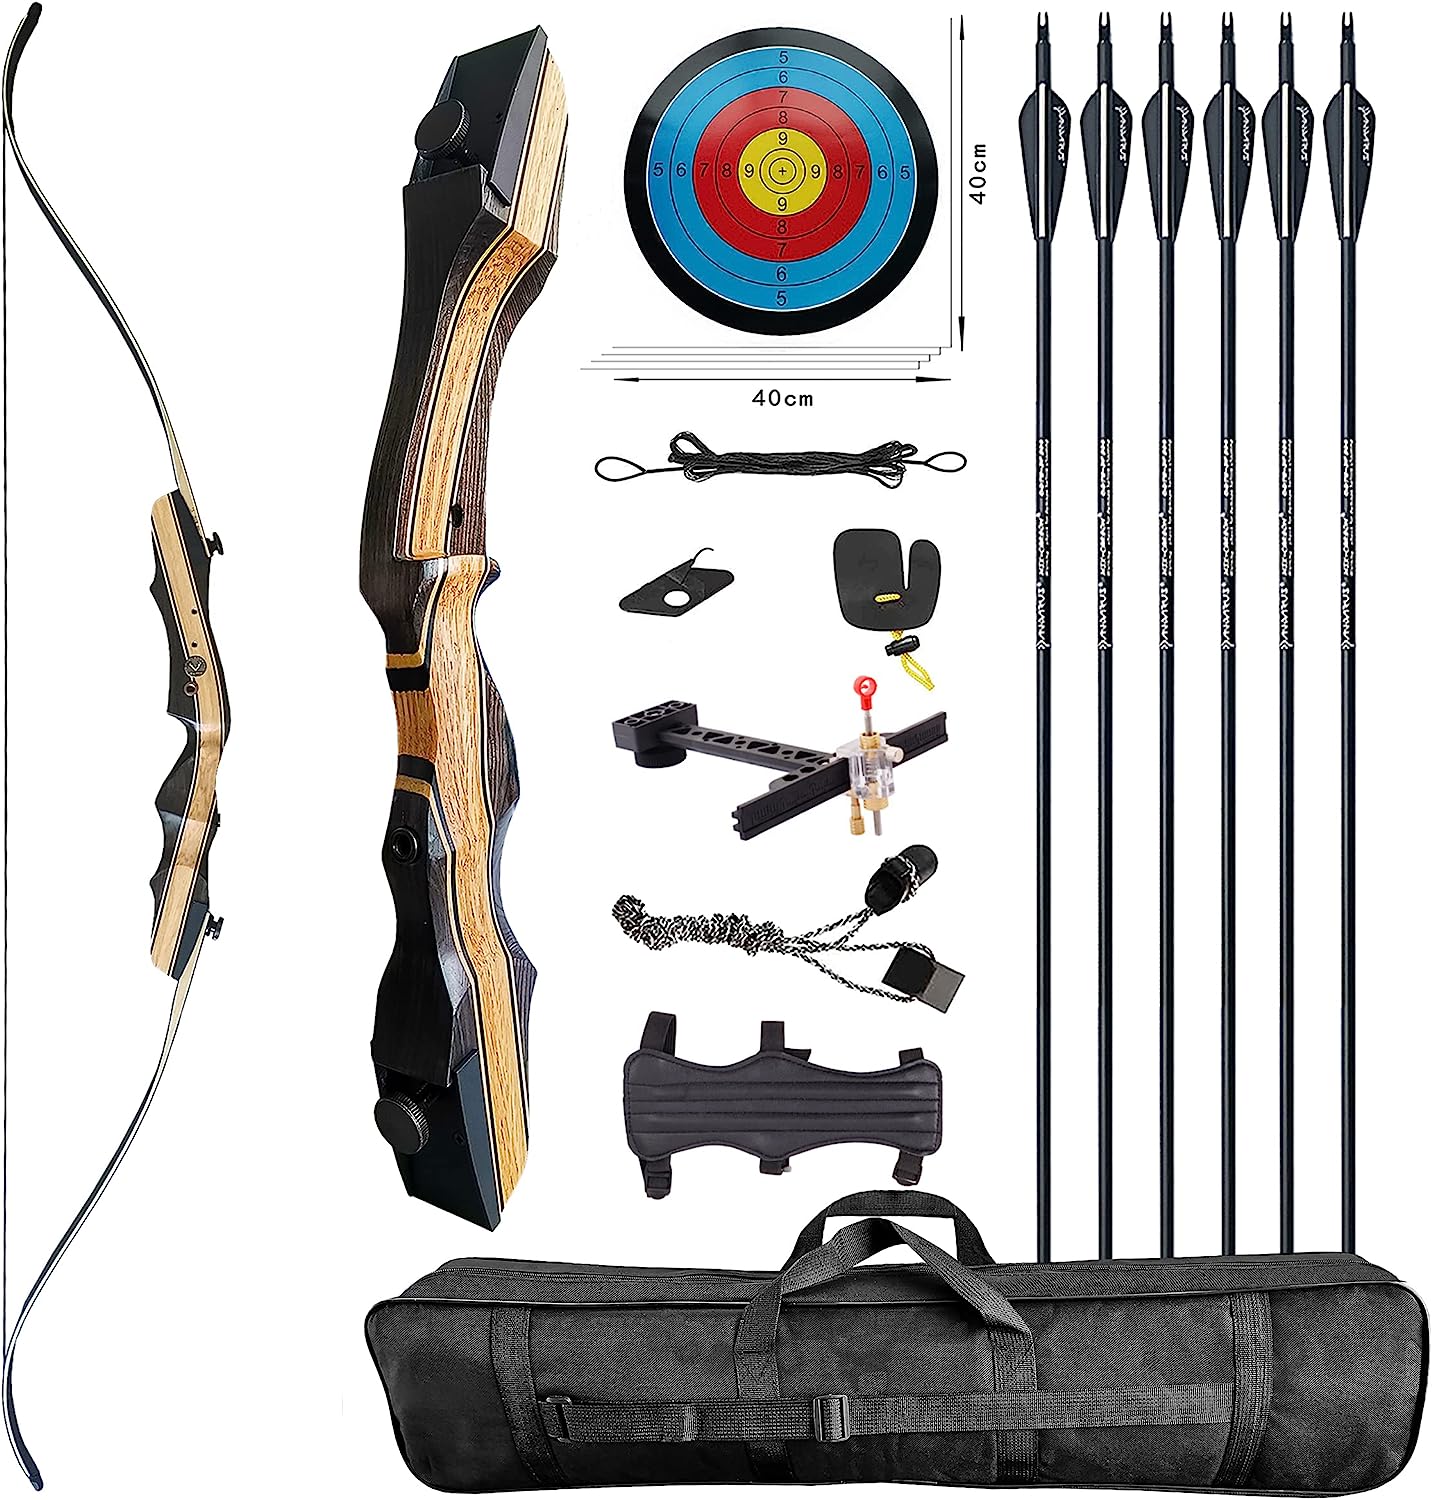 PANDARUS Wooden Takedown Recurve Bow set represents the timeless artistry of archery with its balanced construction and easy-to-use design.